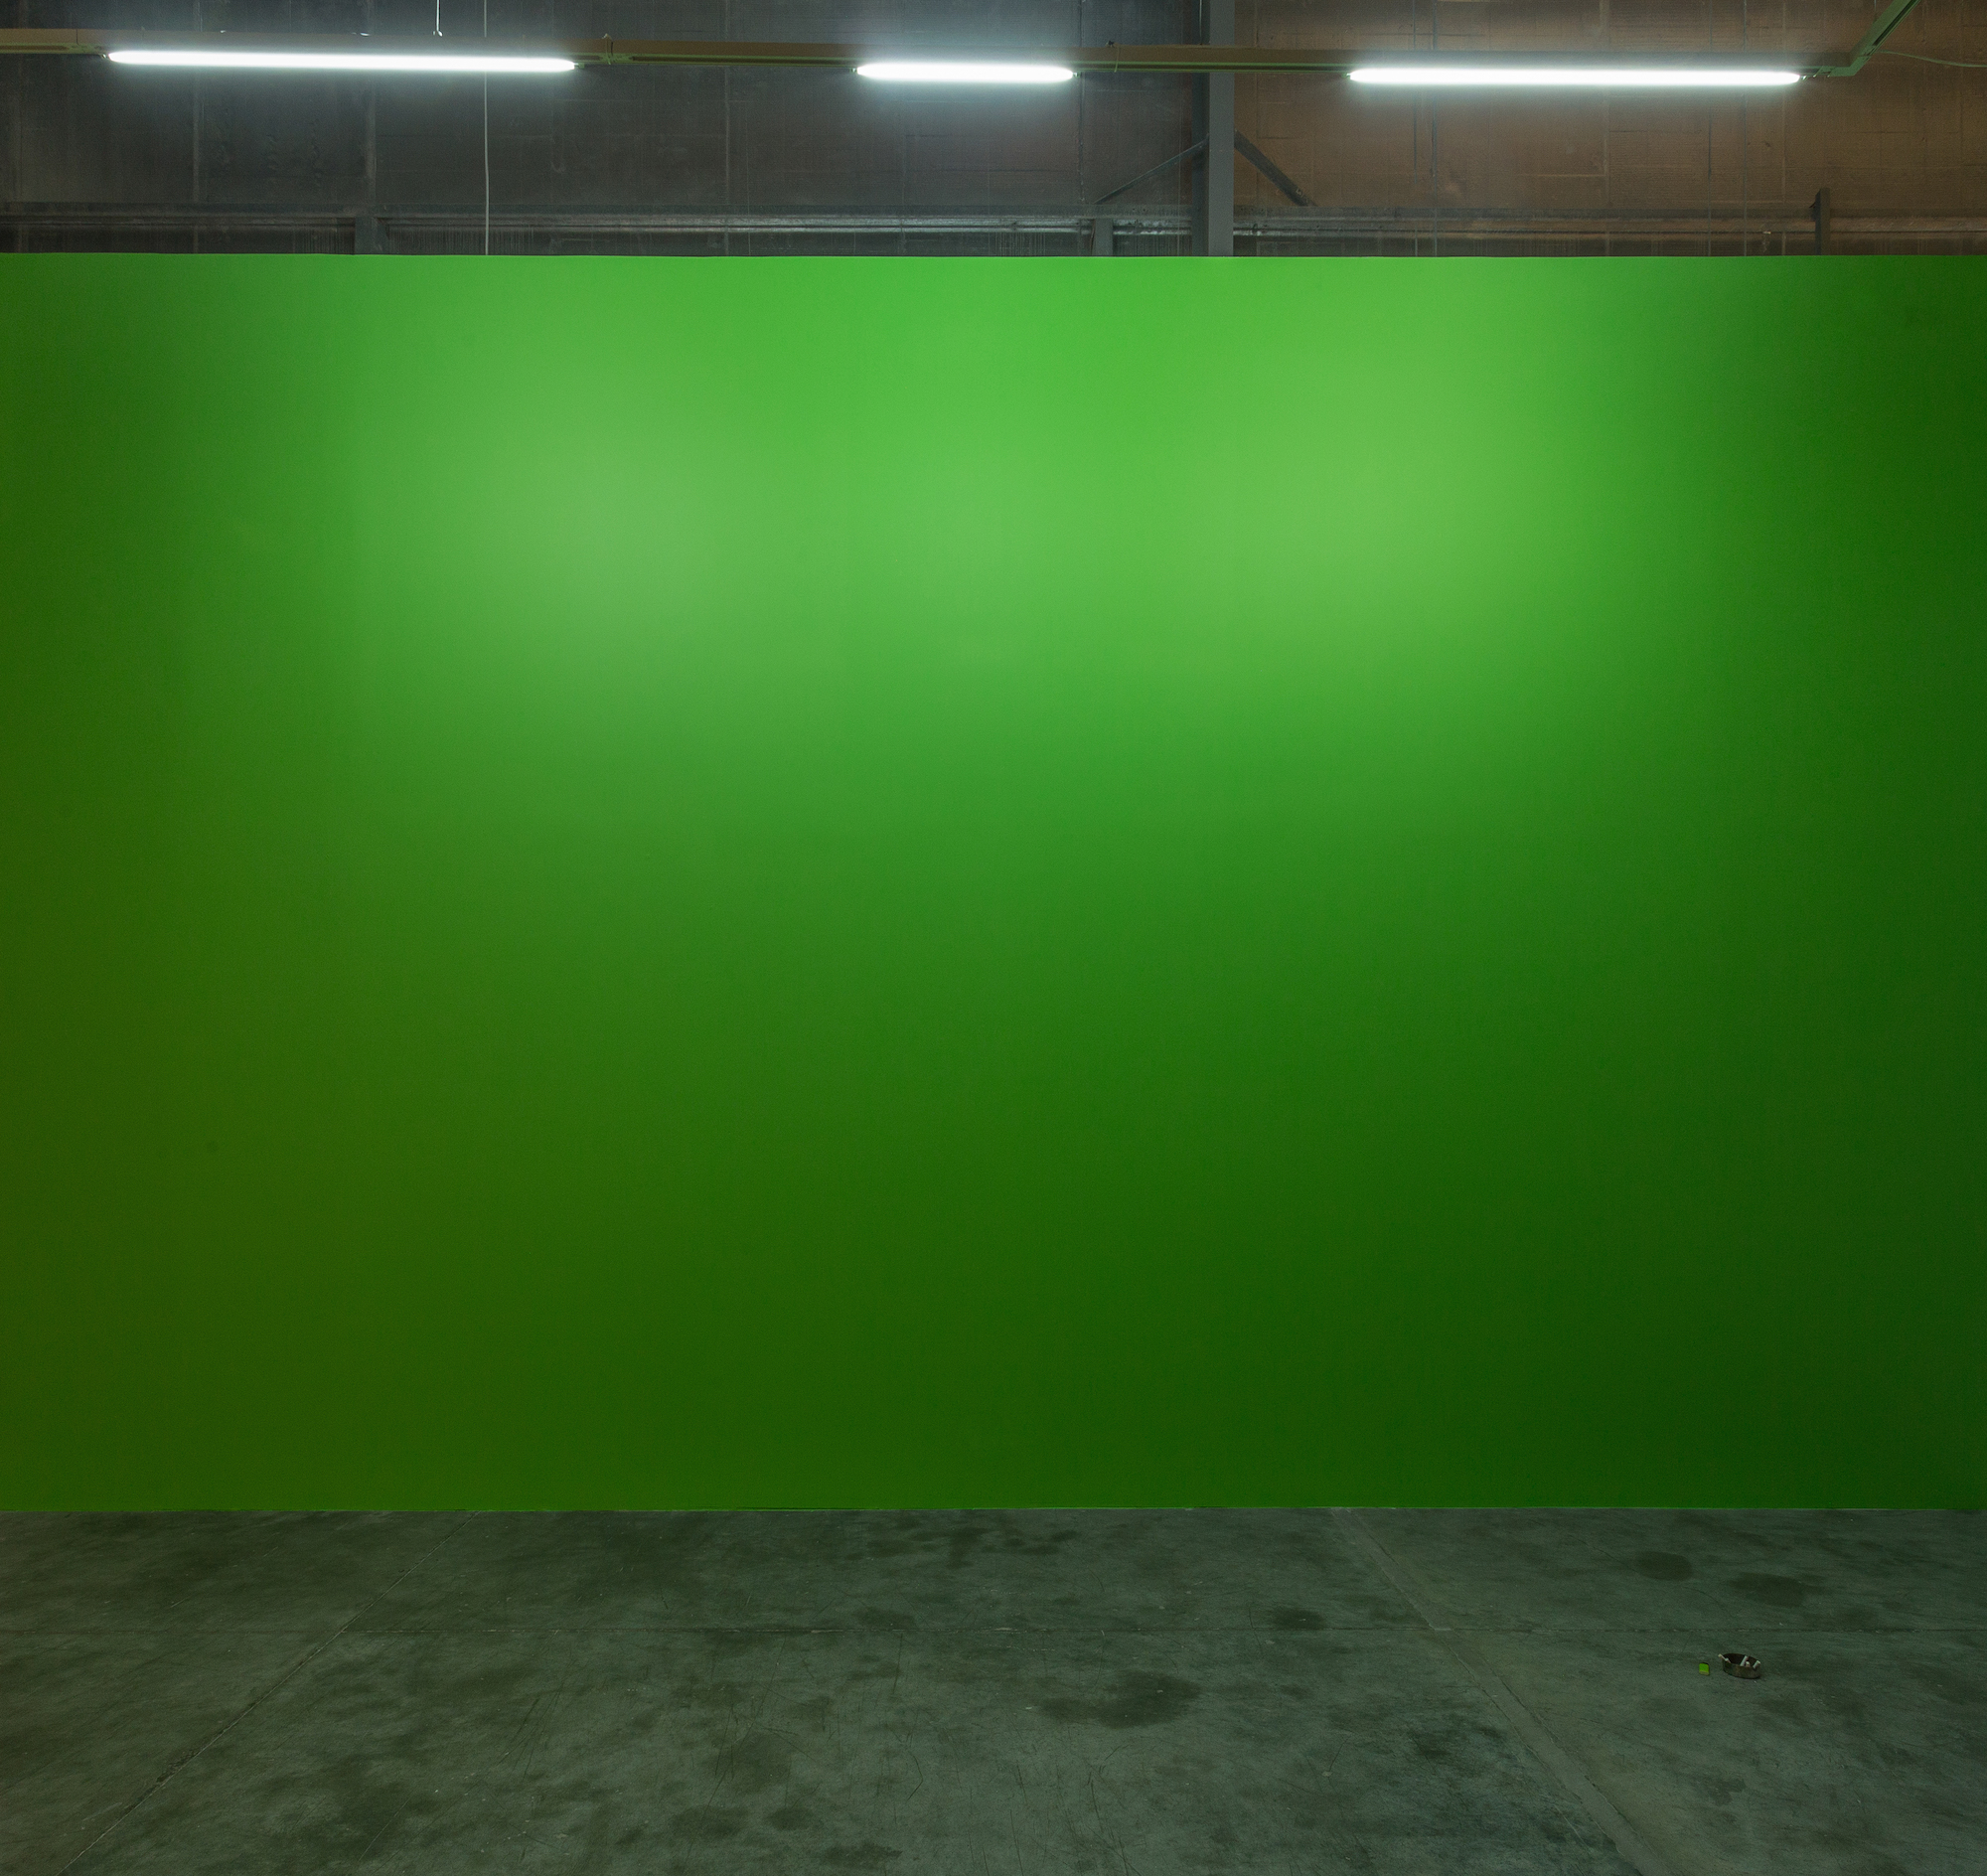  Green wall Fluorescent light, Hassan’s ashtray 2014 Variable dimensions 